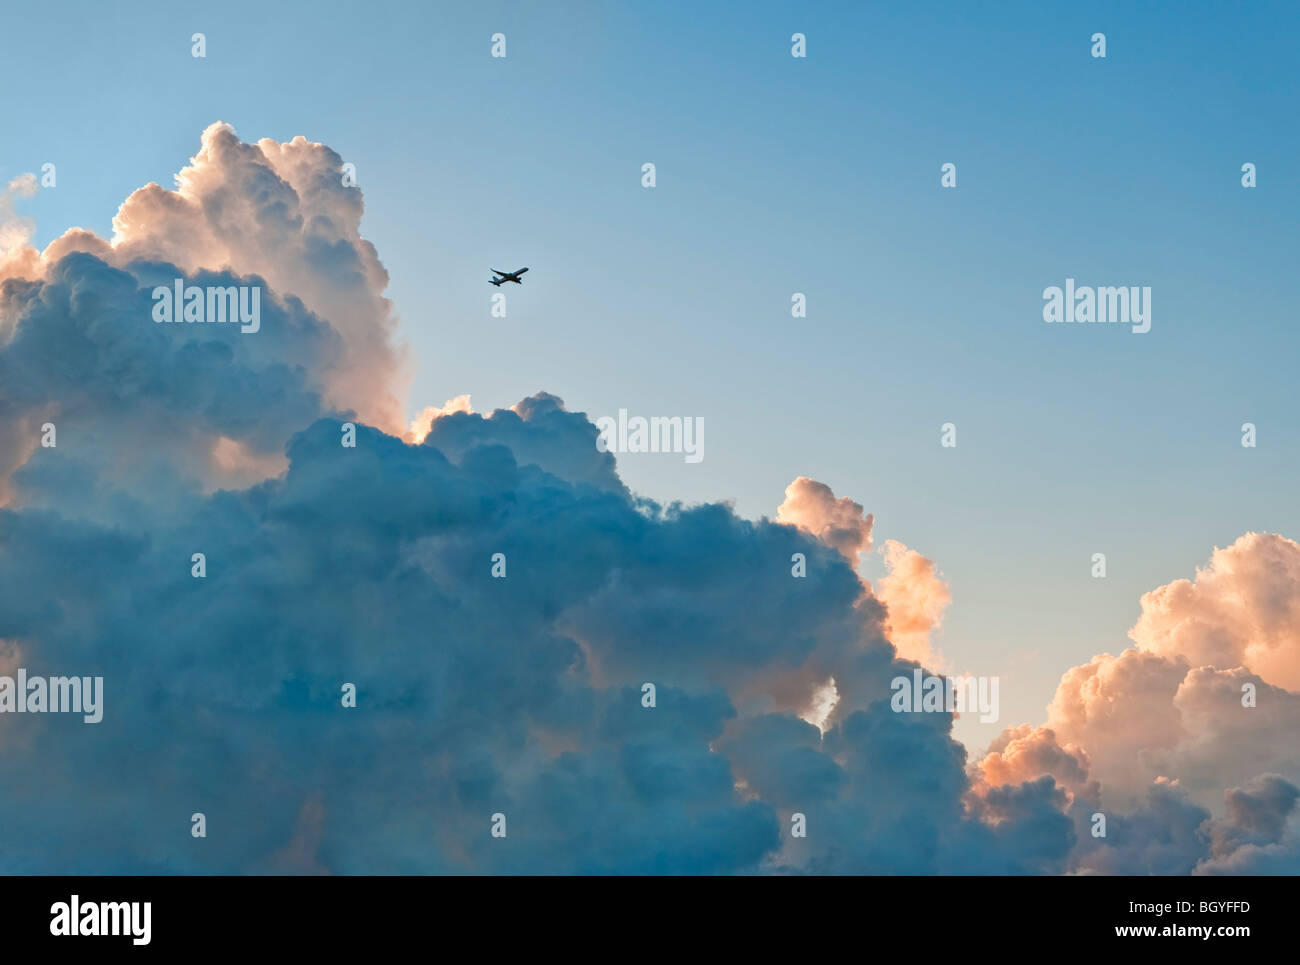 Clouds and airplane Stock Photo